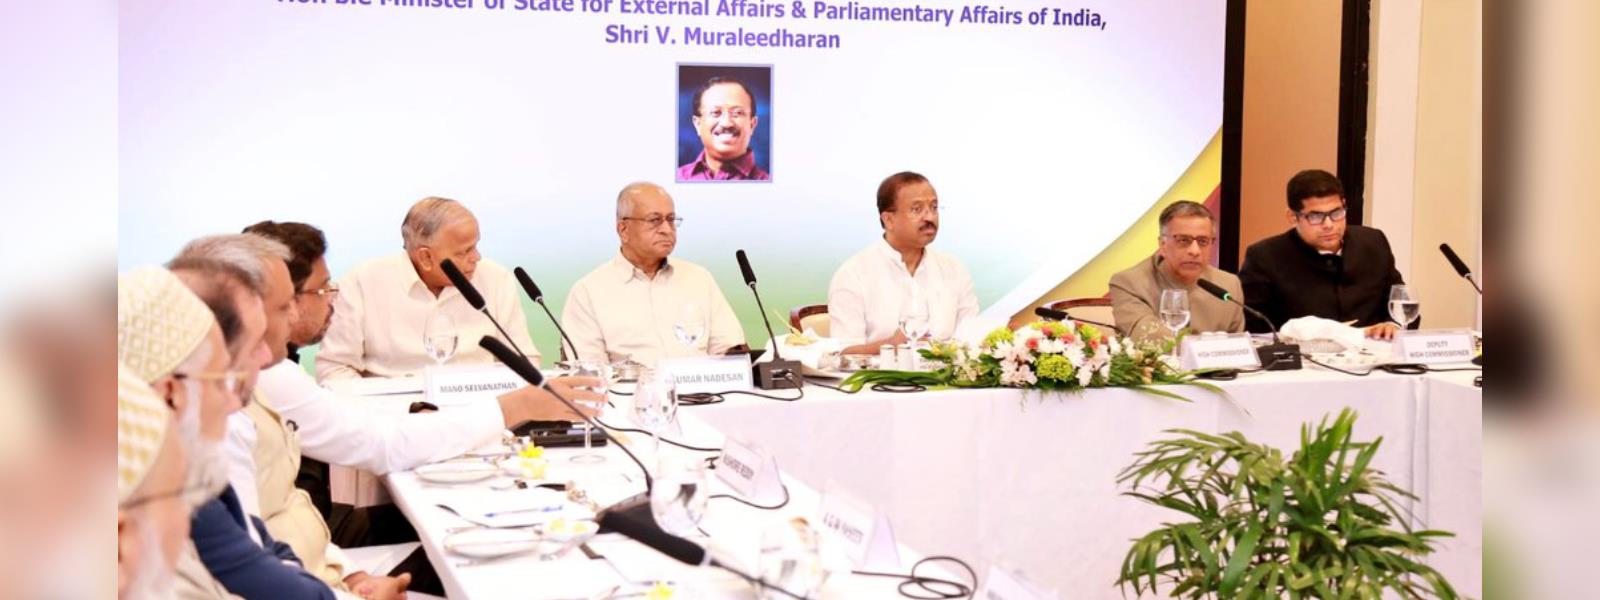 Minister of State for External Affairs Shri V. Muraleedharan interacted with the Indian diaspora in Colombo